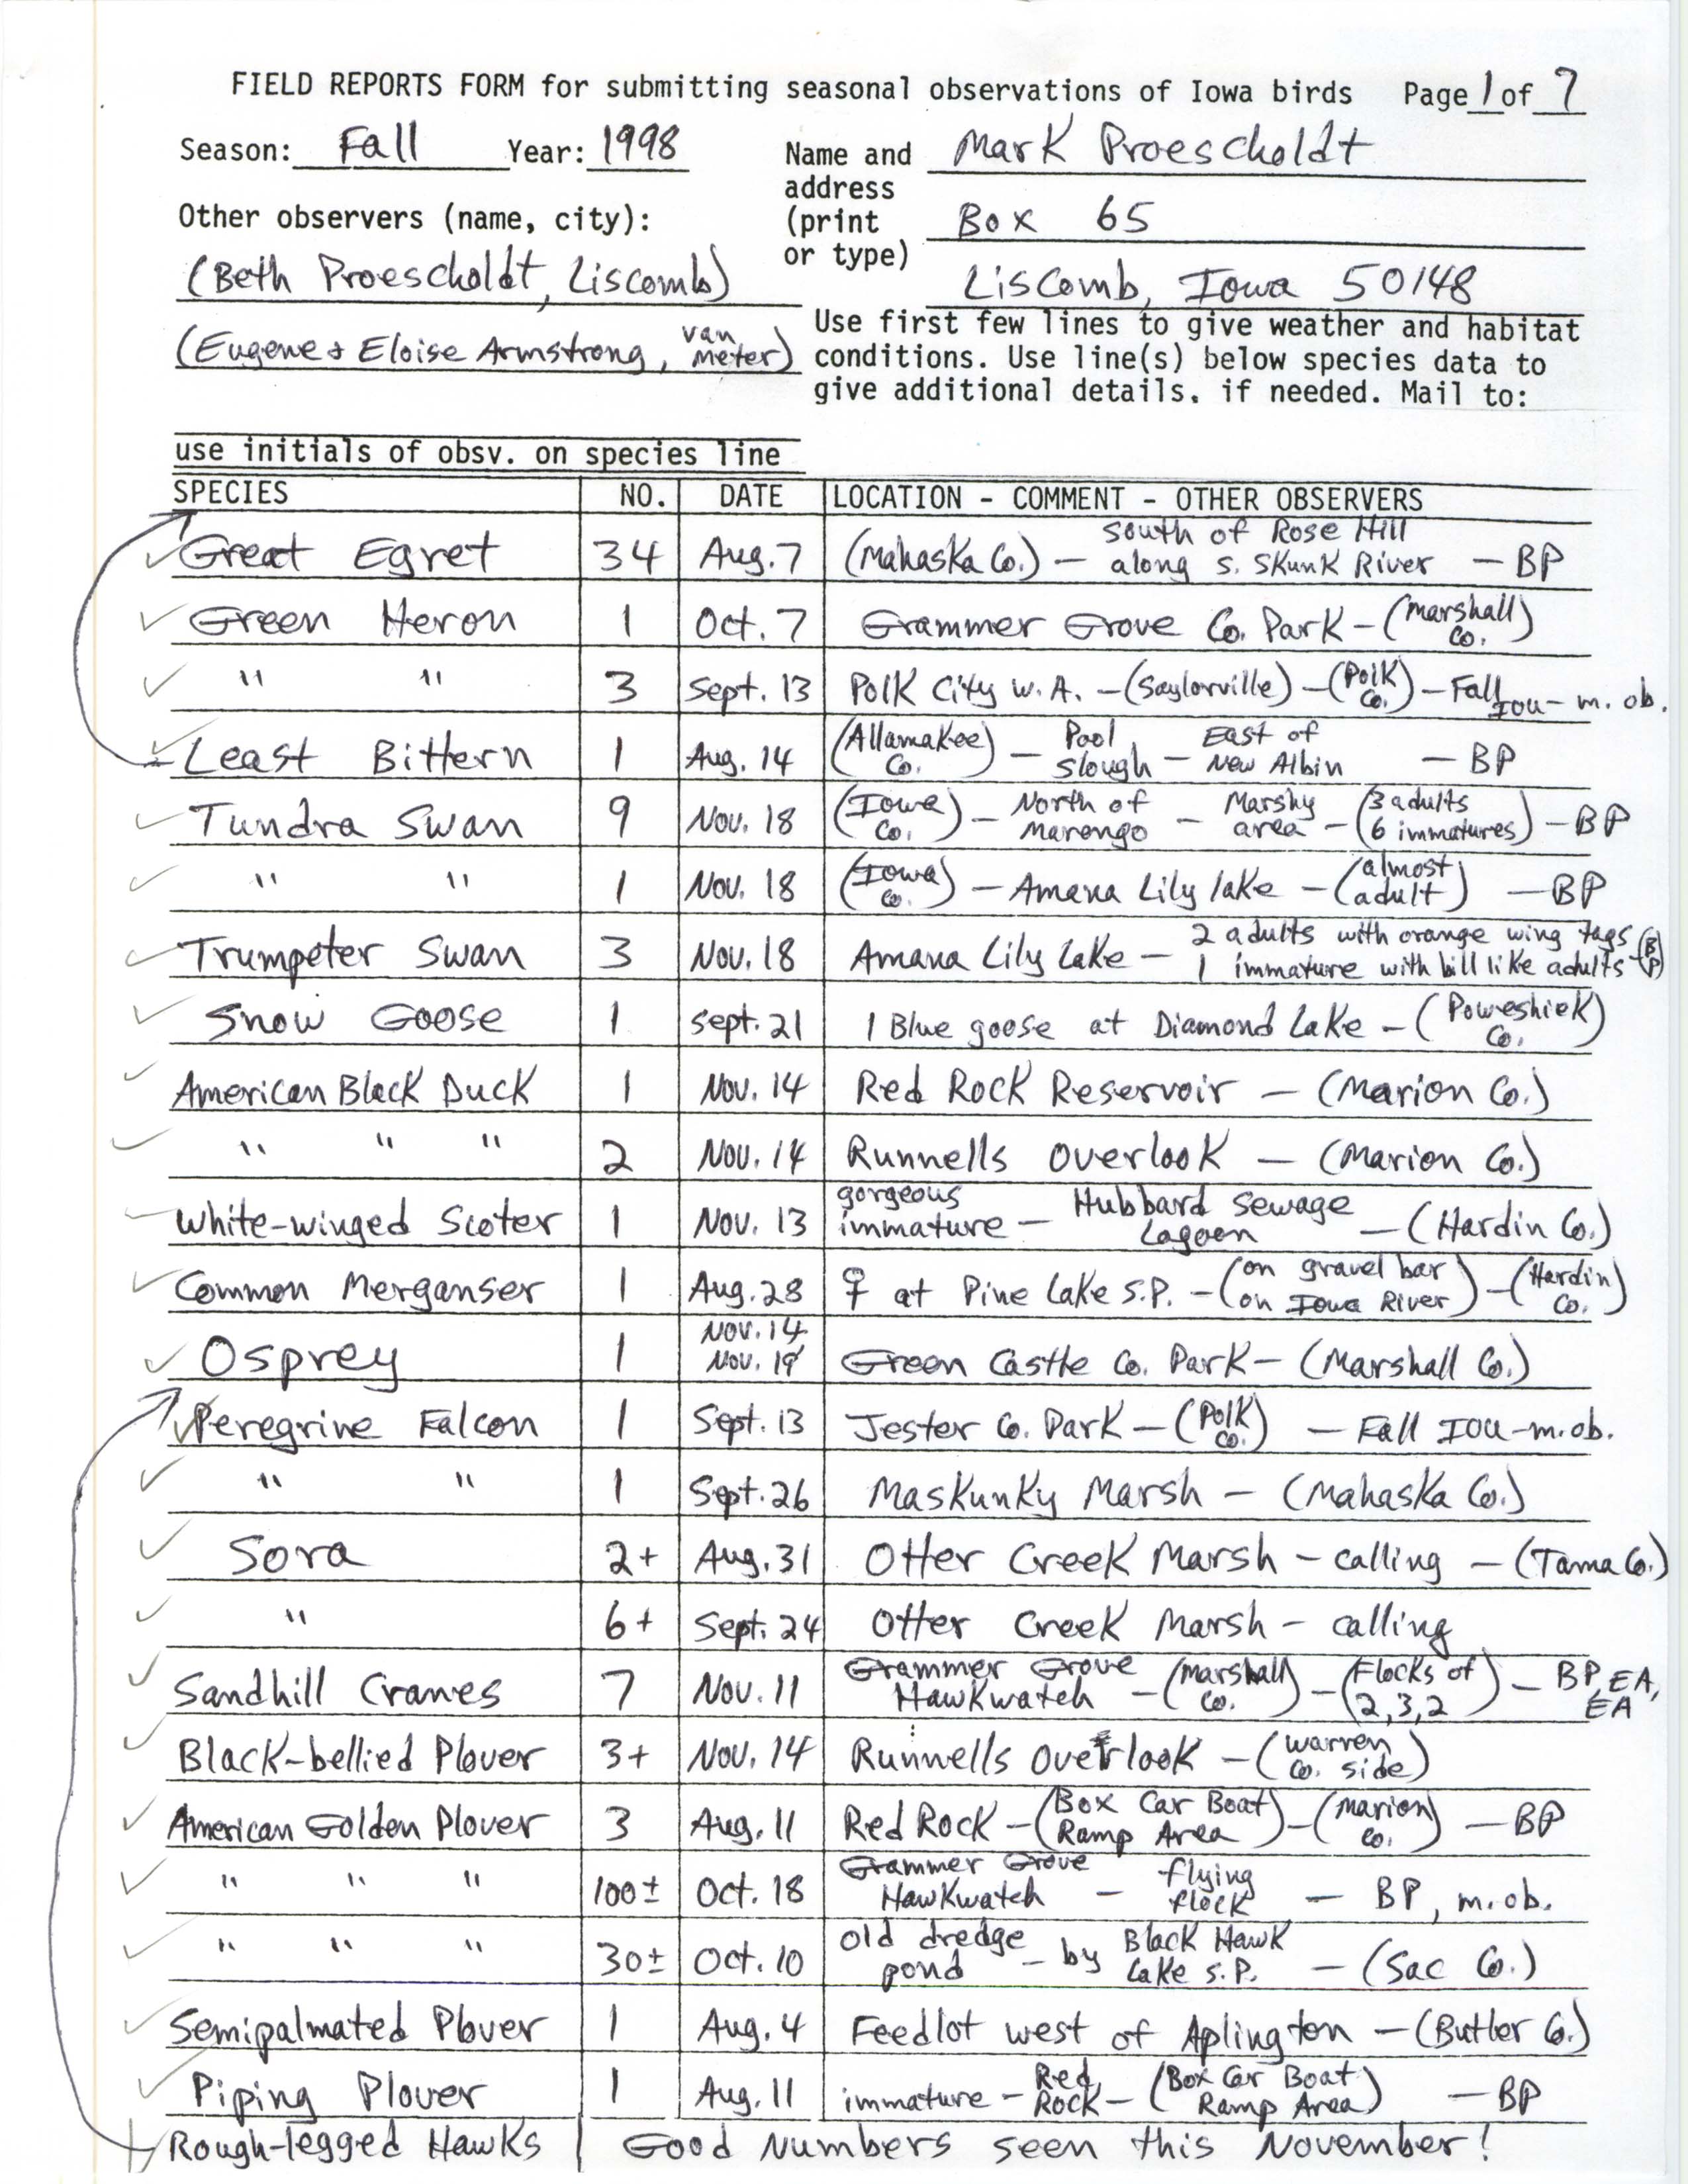 Field reports form for submitting seasonal observations of Iowa birds and letter to Thomas H. Kent contributed by Mark Proescholdt, fall 1998